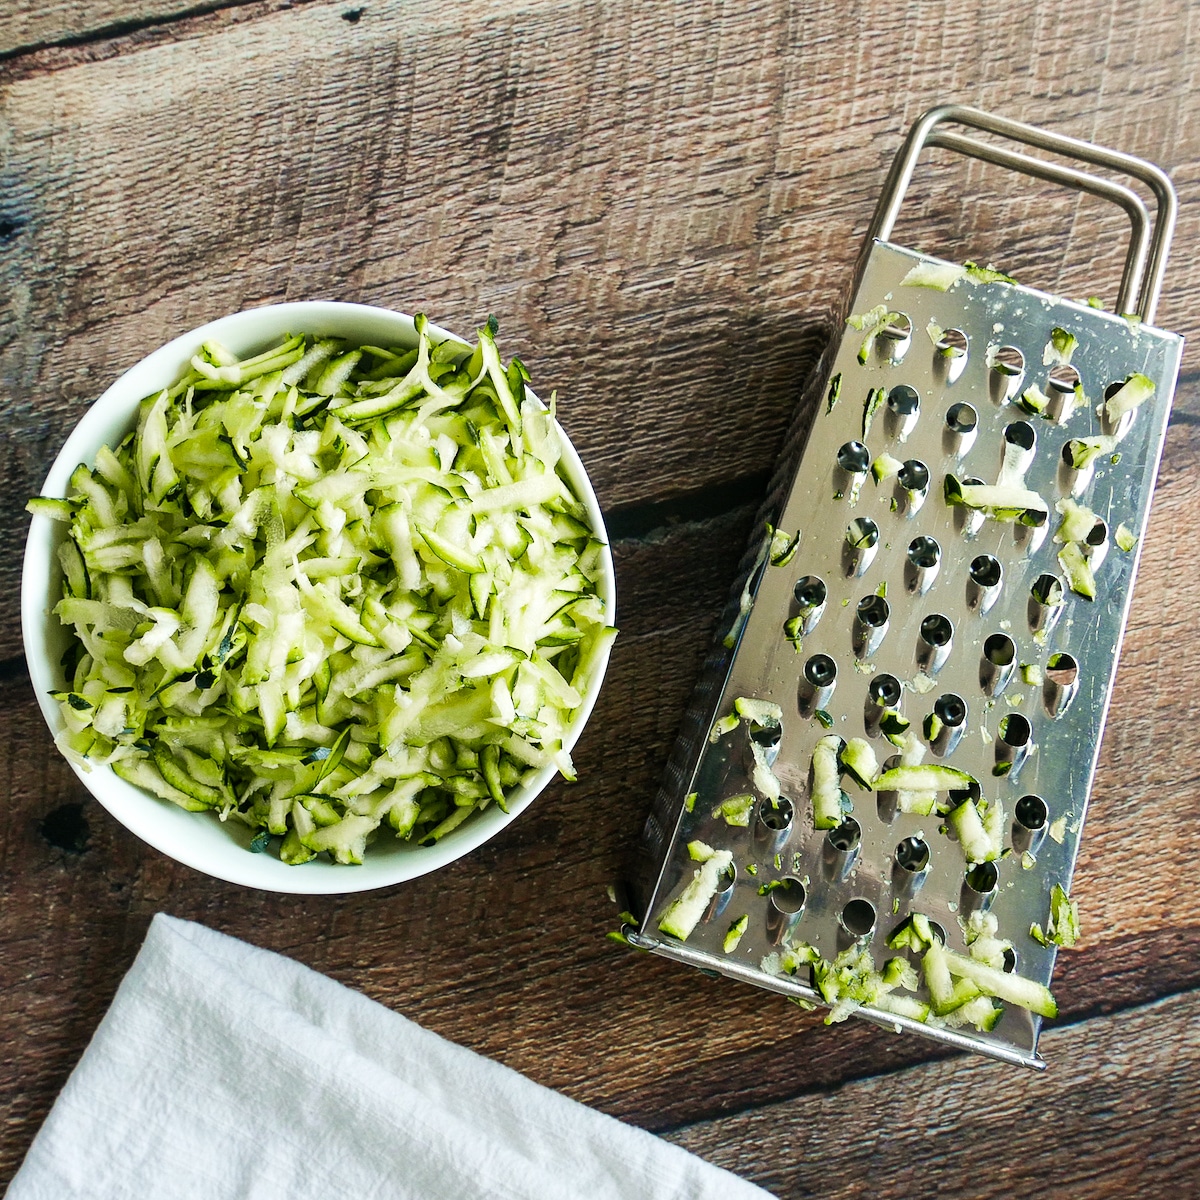 Box grater resting next to a bowl full of grated zucchini.